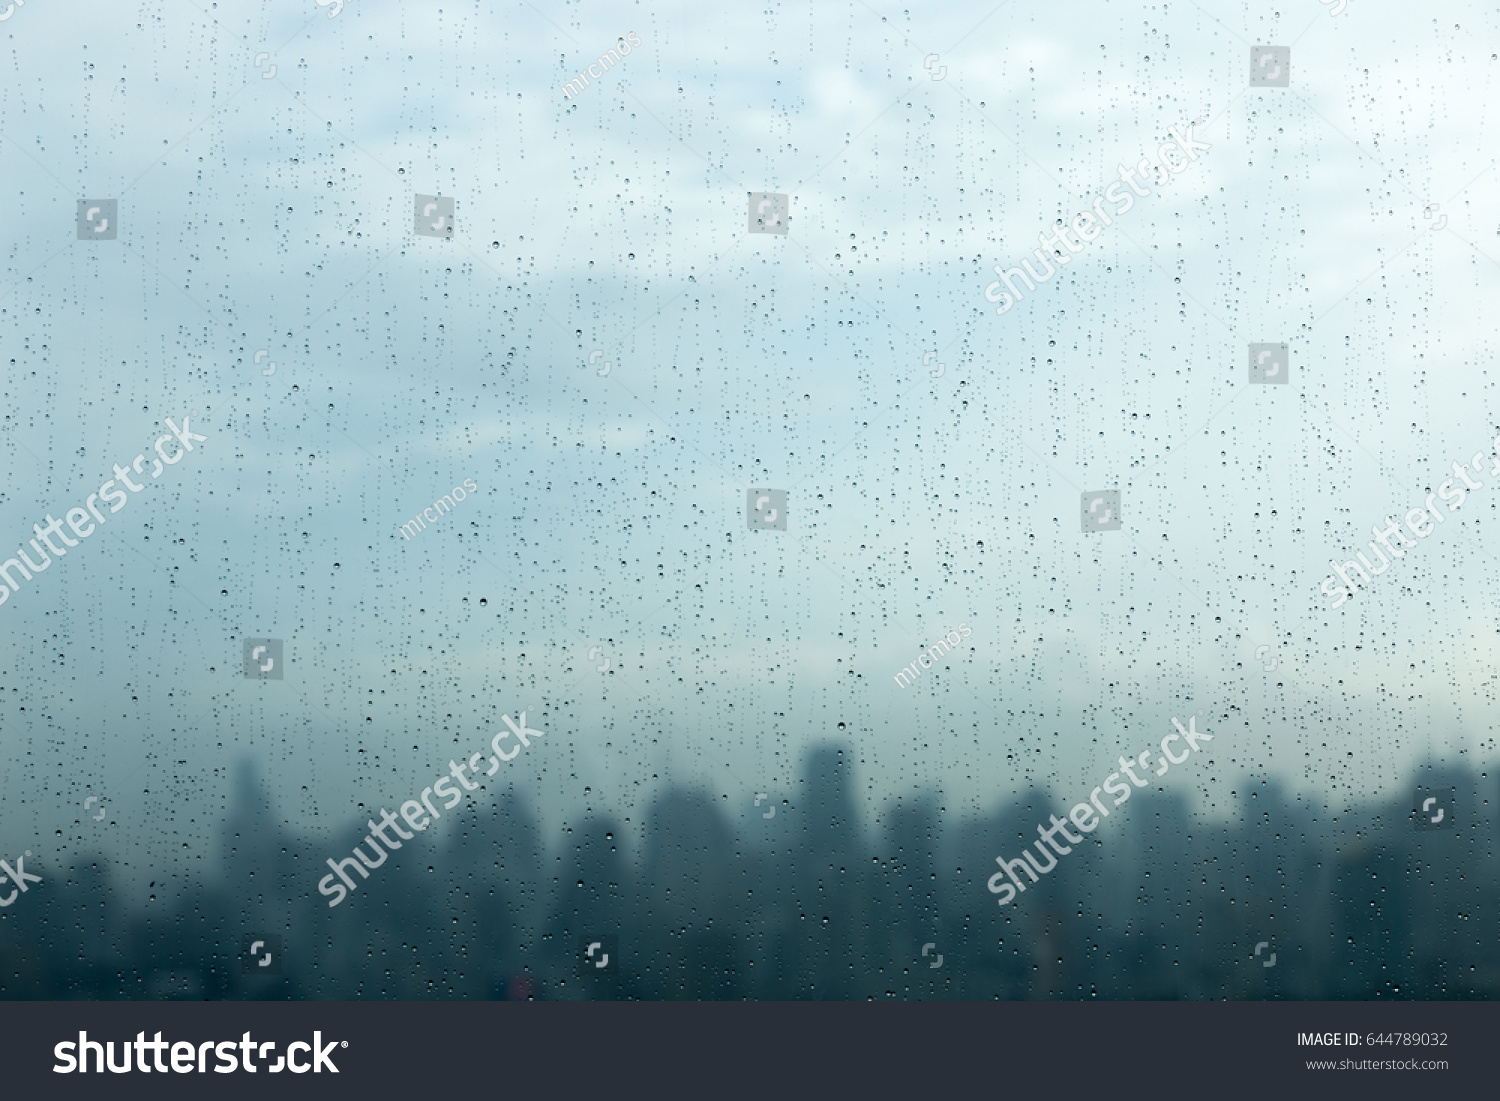 Rain drops on window glass and blurred cityscape and sunlight in background. #644789032